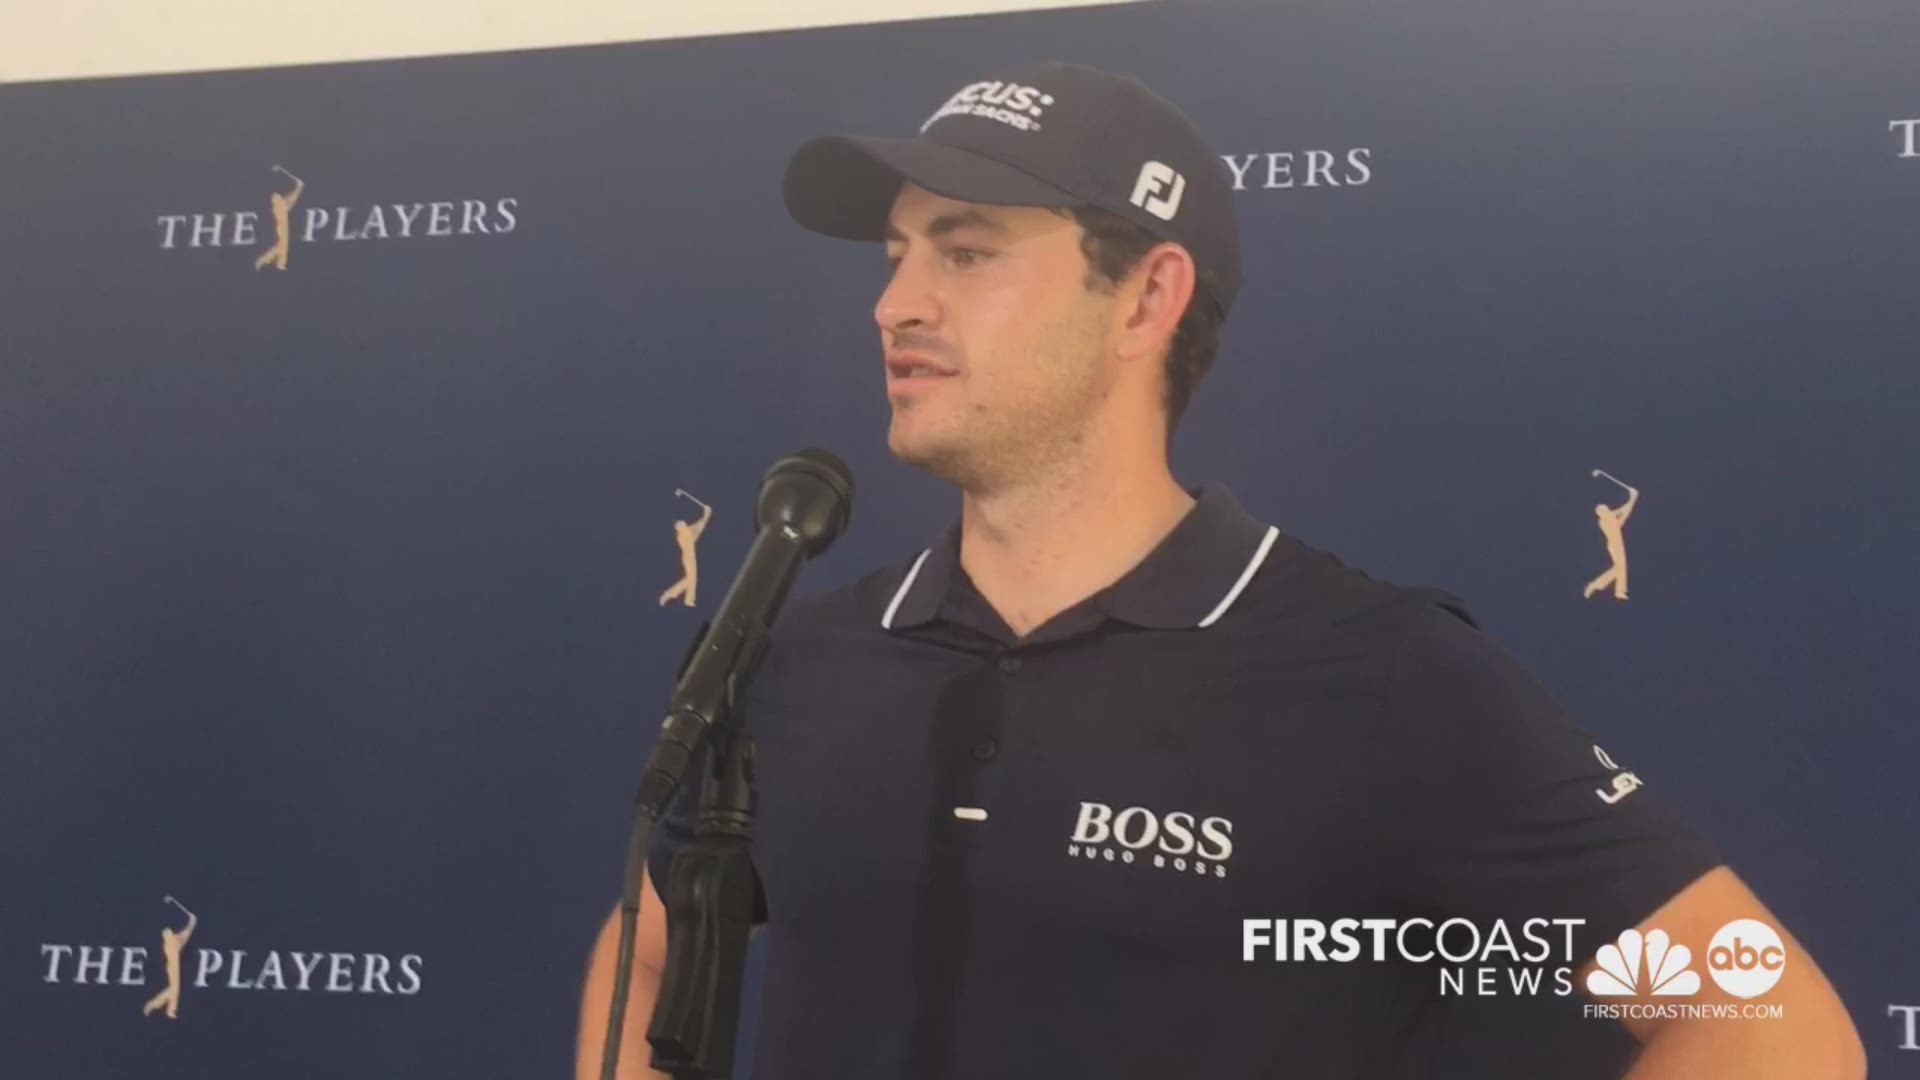 Patrick Cantlay talked Thursday about the PGA Tour's decision to bar fans from TPC Sawgrass during the final three days of play.